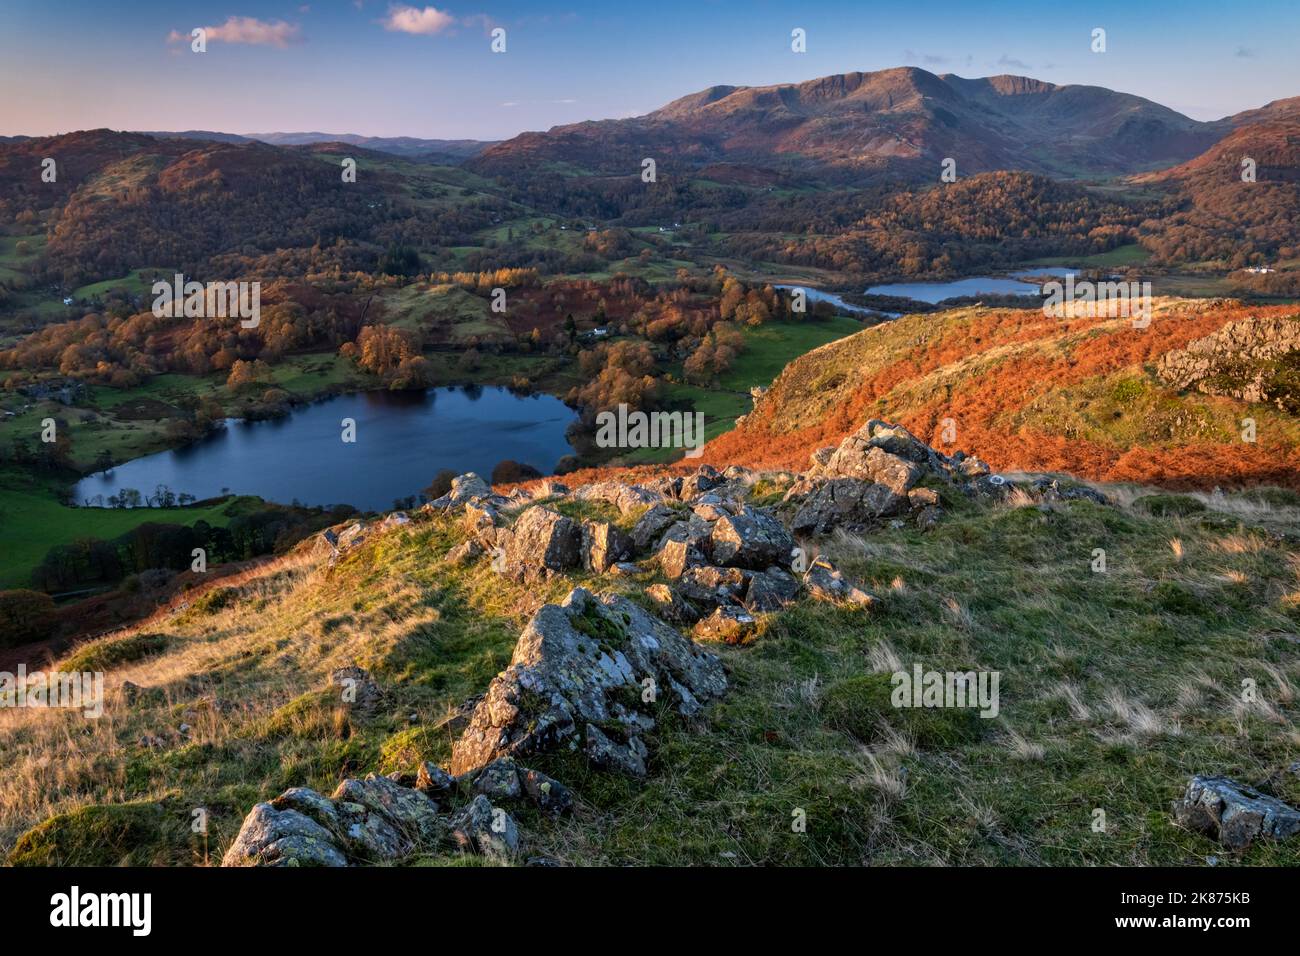 Loughrigg Tarn, Elter Water and Wetherlam from Loughrigg Fell in autumn, Lake District National Park, UNESCO, Cumbria, England Stock Photo